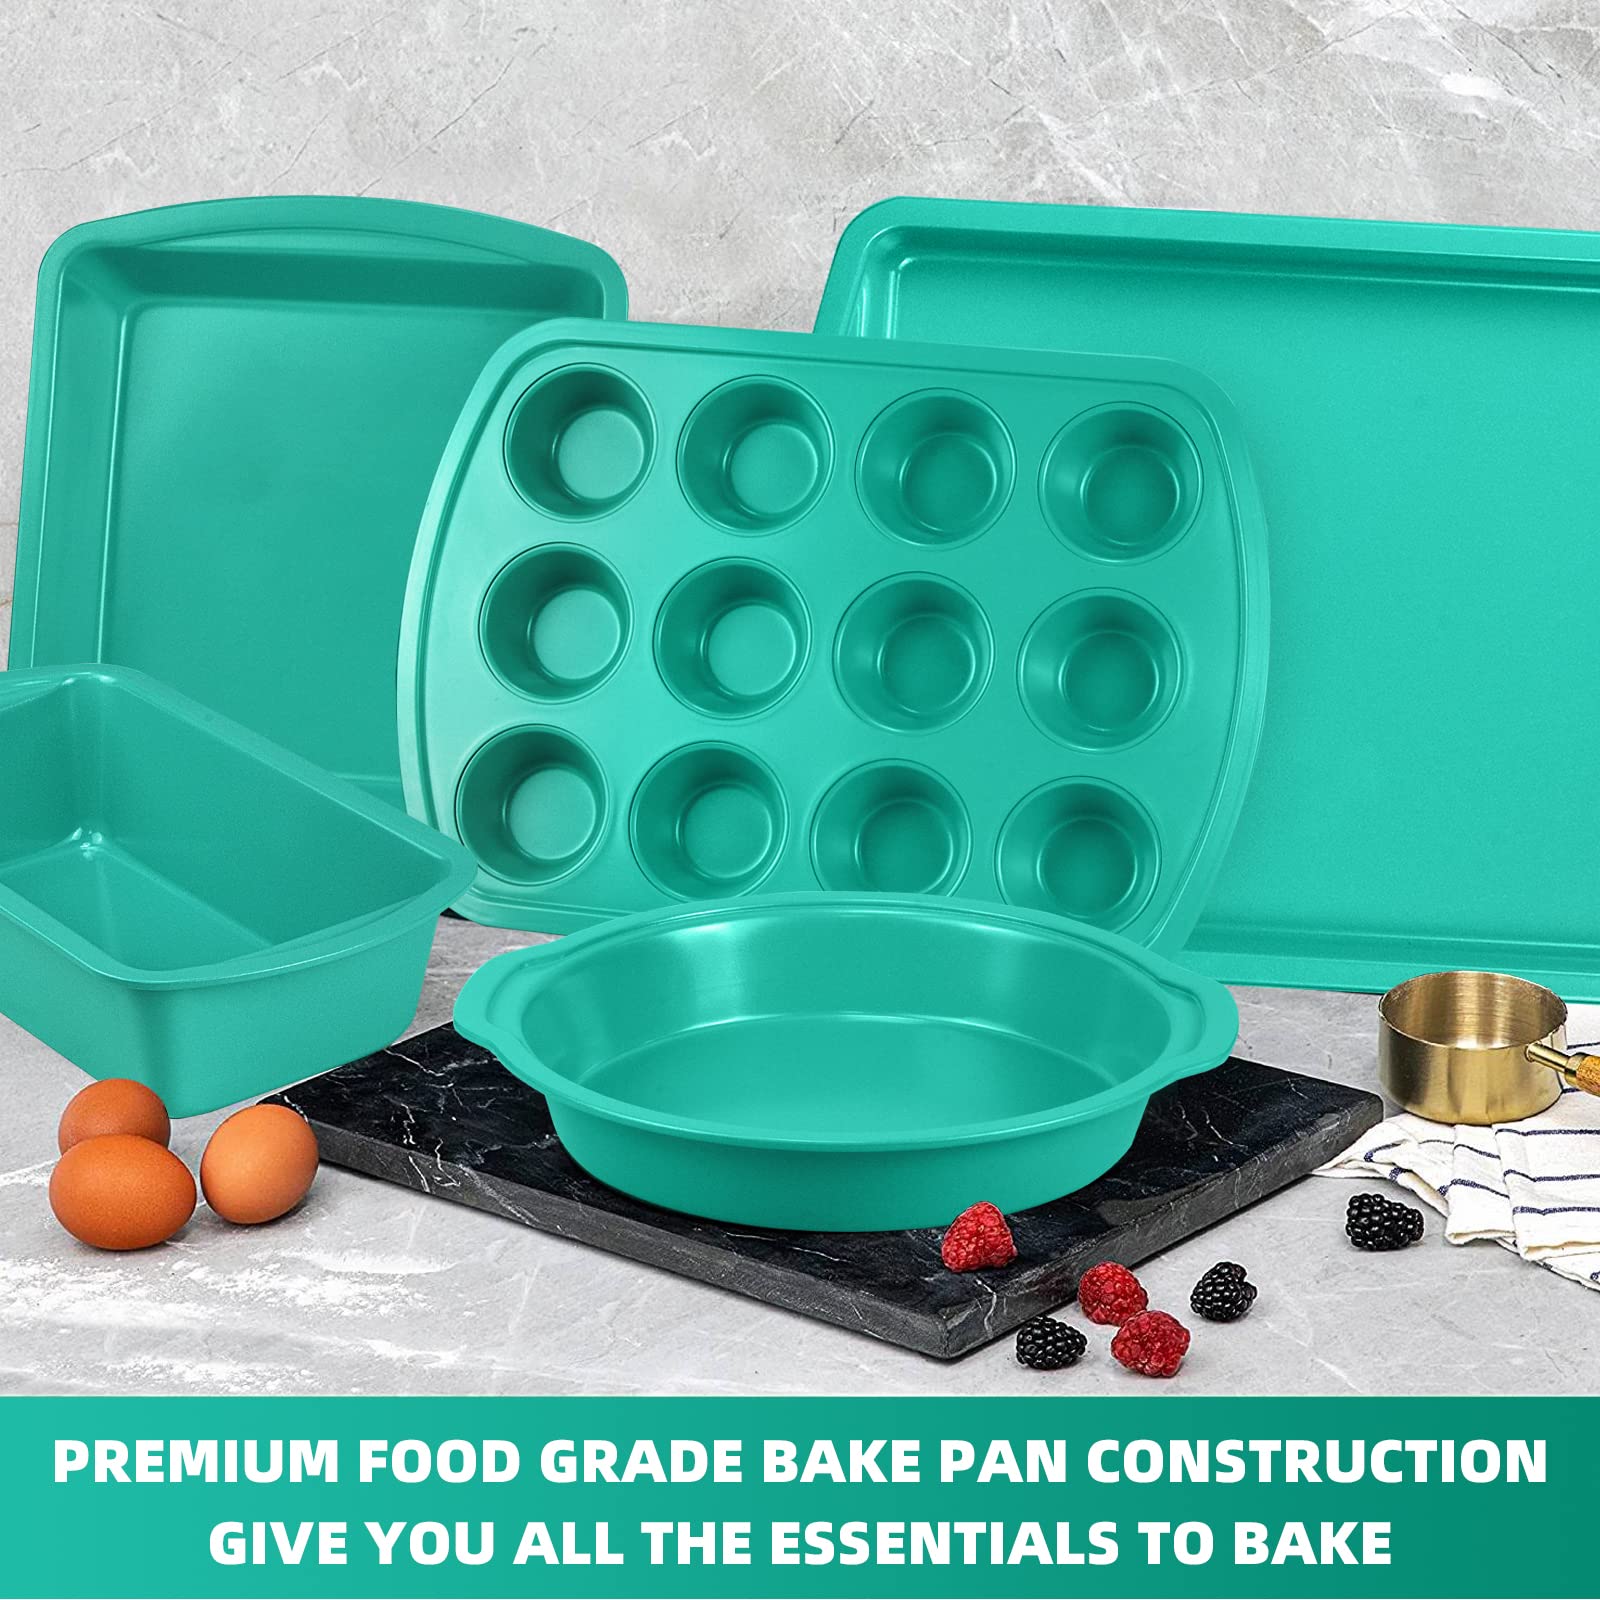 10-Piece Nonstick Bakeware Set Baking Pans, Baking Sheets, Cookie Sheets, Muffin Pan, Bread Pan, Pizza Pan, Cake Pan and Cooling Rack, Oven Safe/0.8mm Thick/ Dishwasher Safe/ Heavy Duty